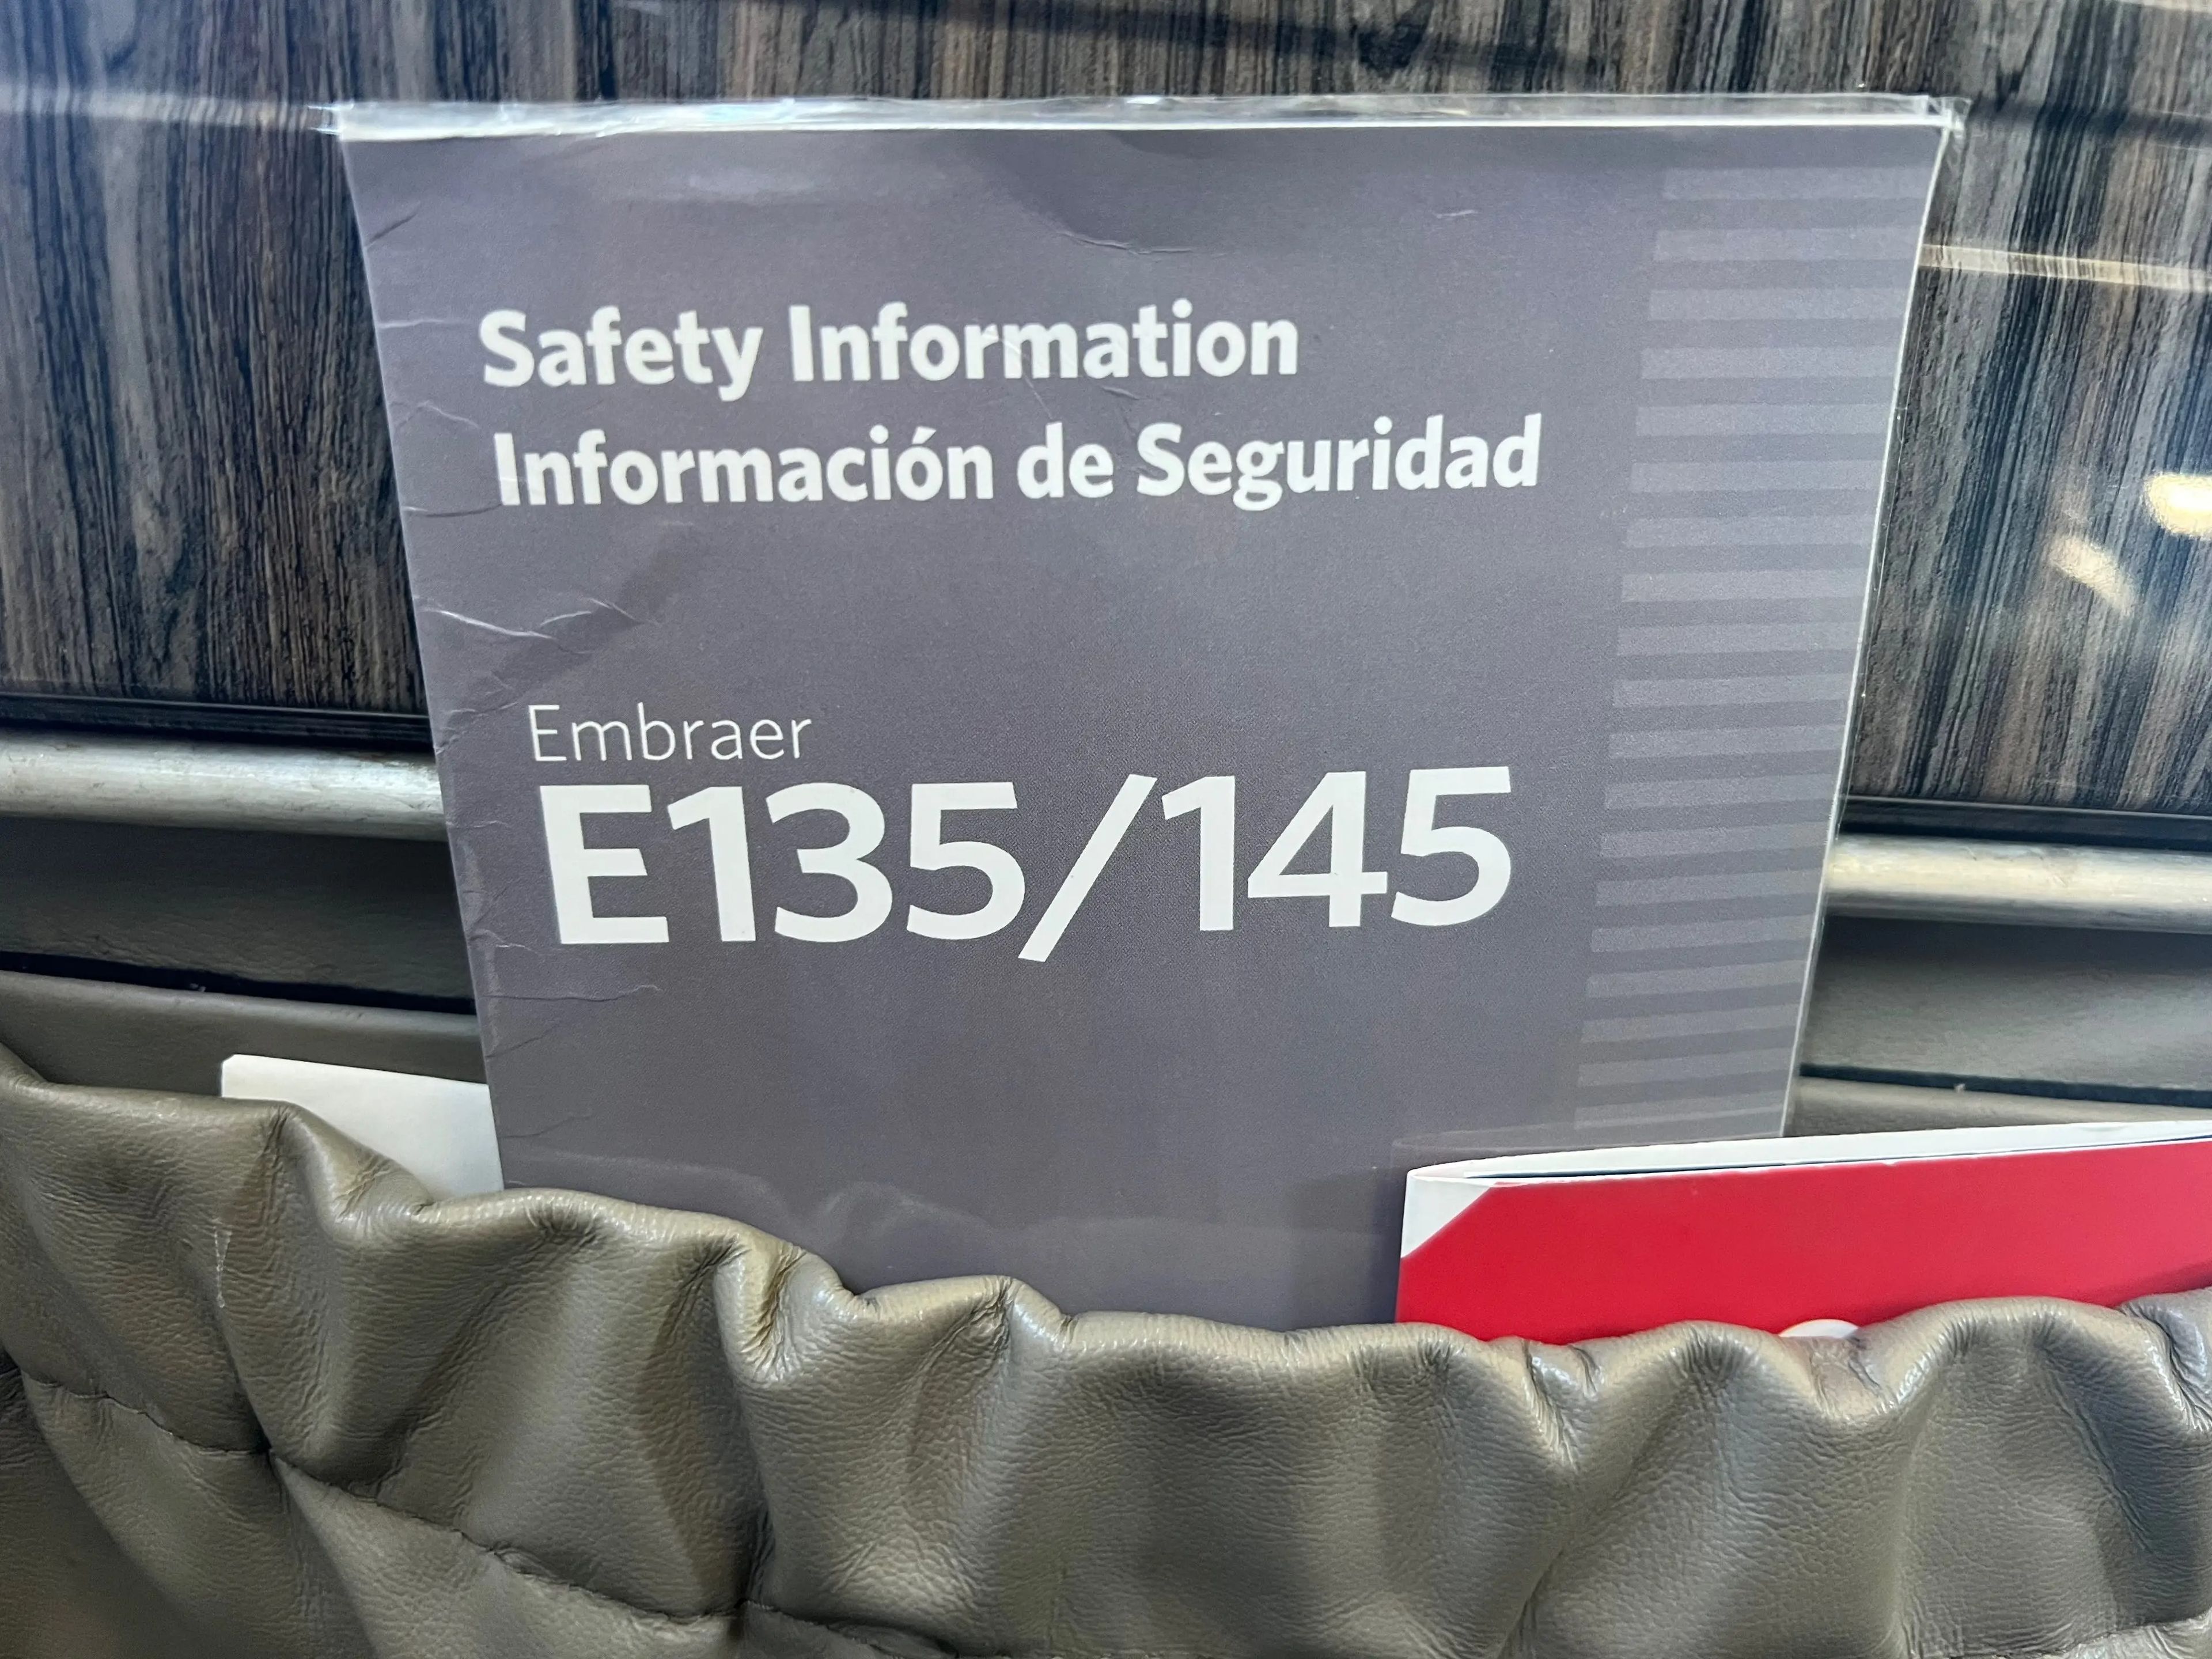 A safety information pamphlet onboard a JSX Embraer 135/145 aircraft.